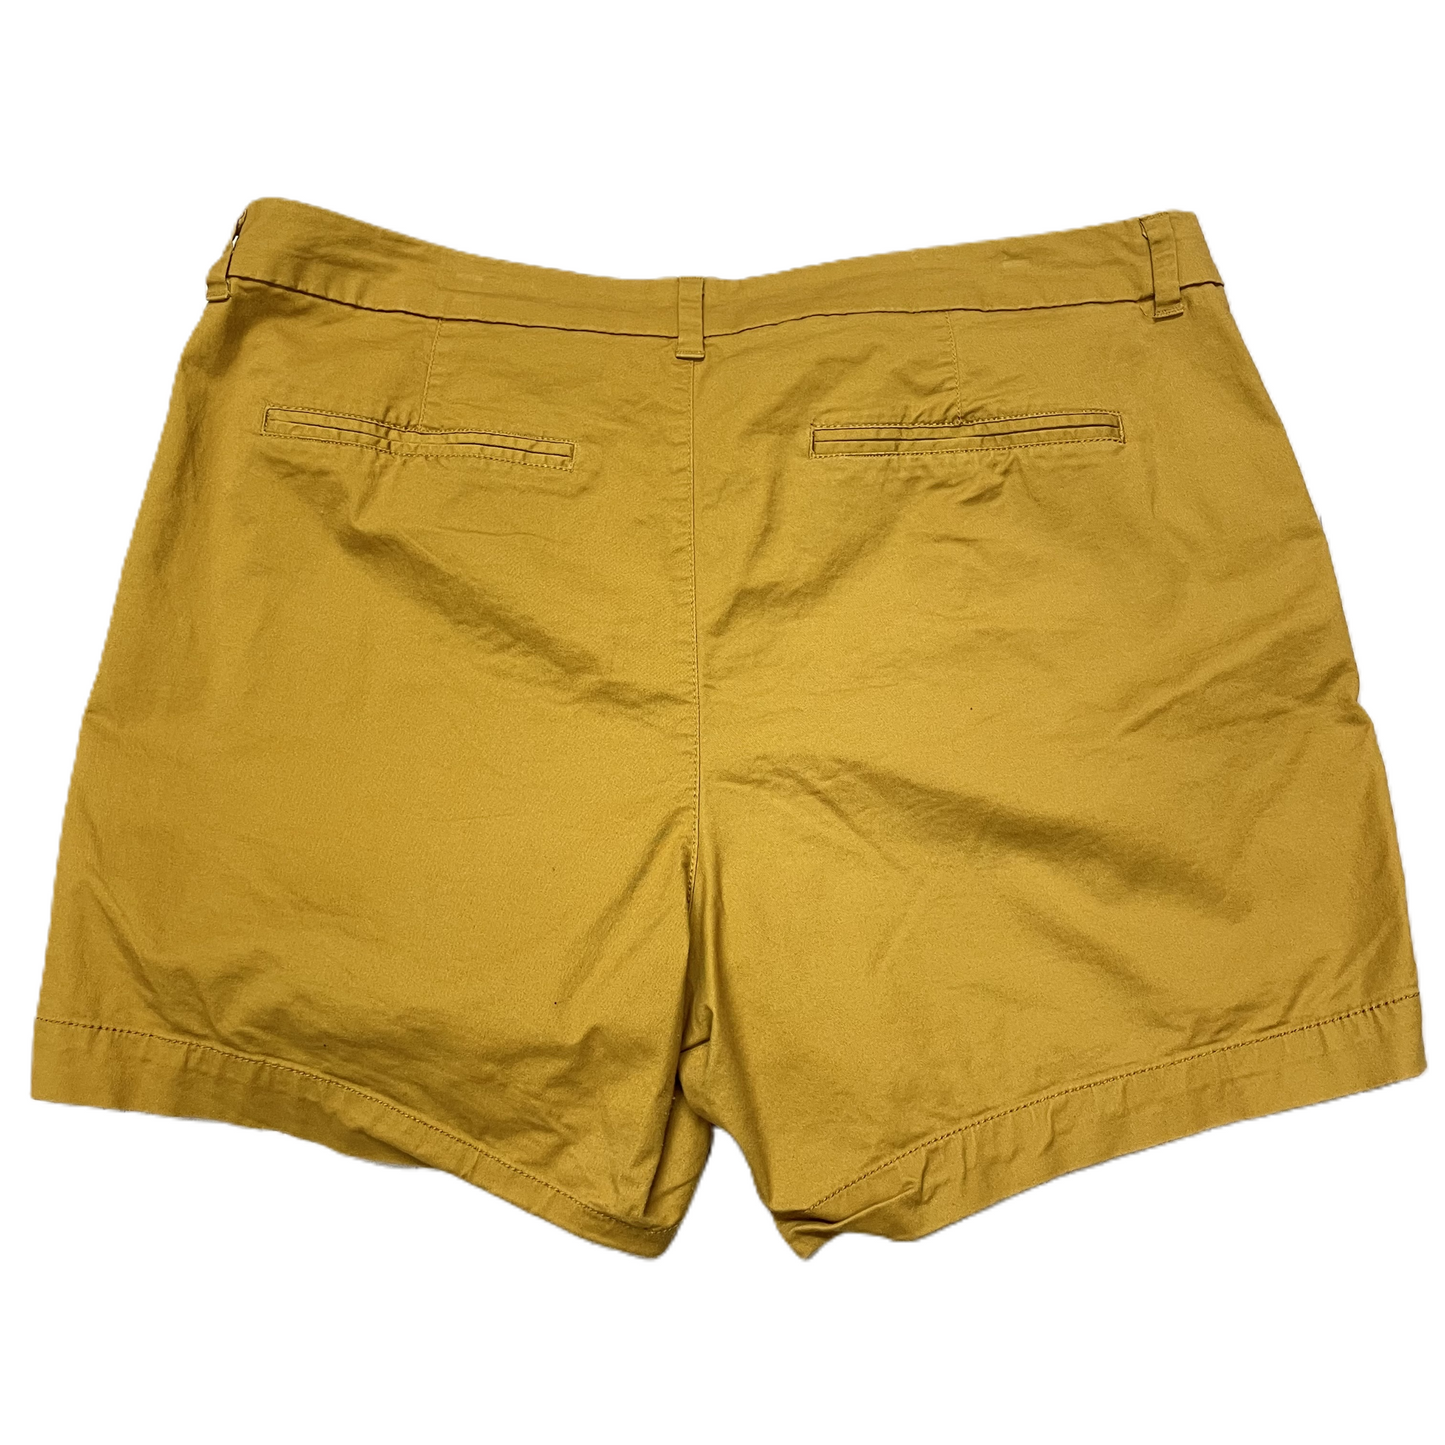 Bronze Shorts By Old Navy, Size: 16